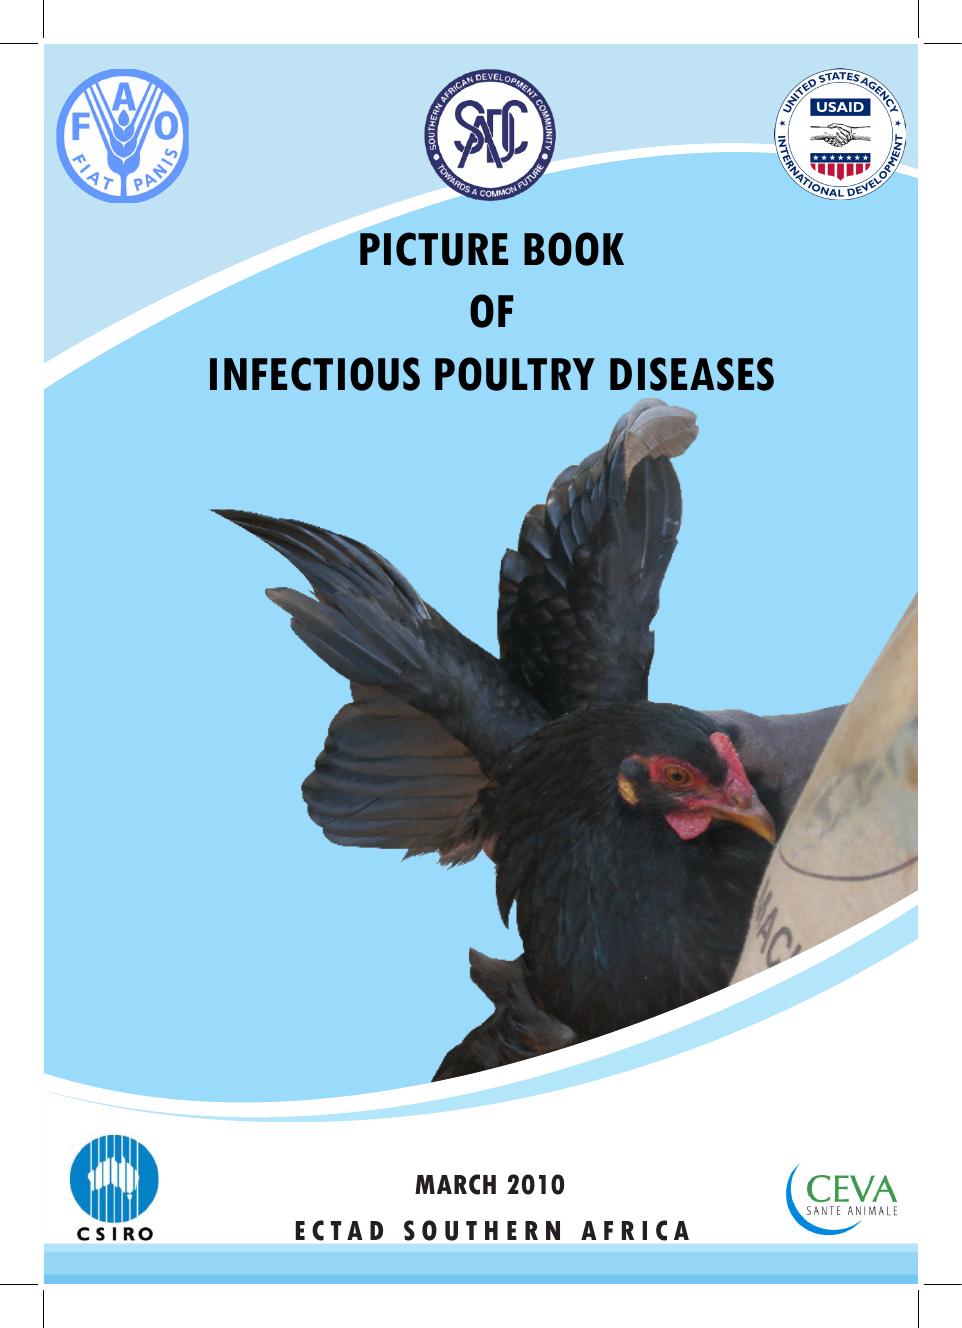 Poultry Disease Diagnosis Picture Book-2 2010